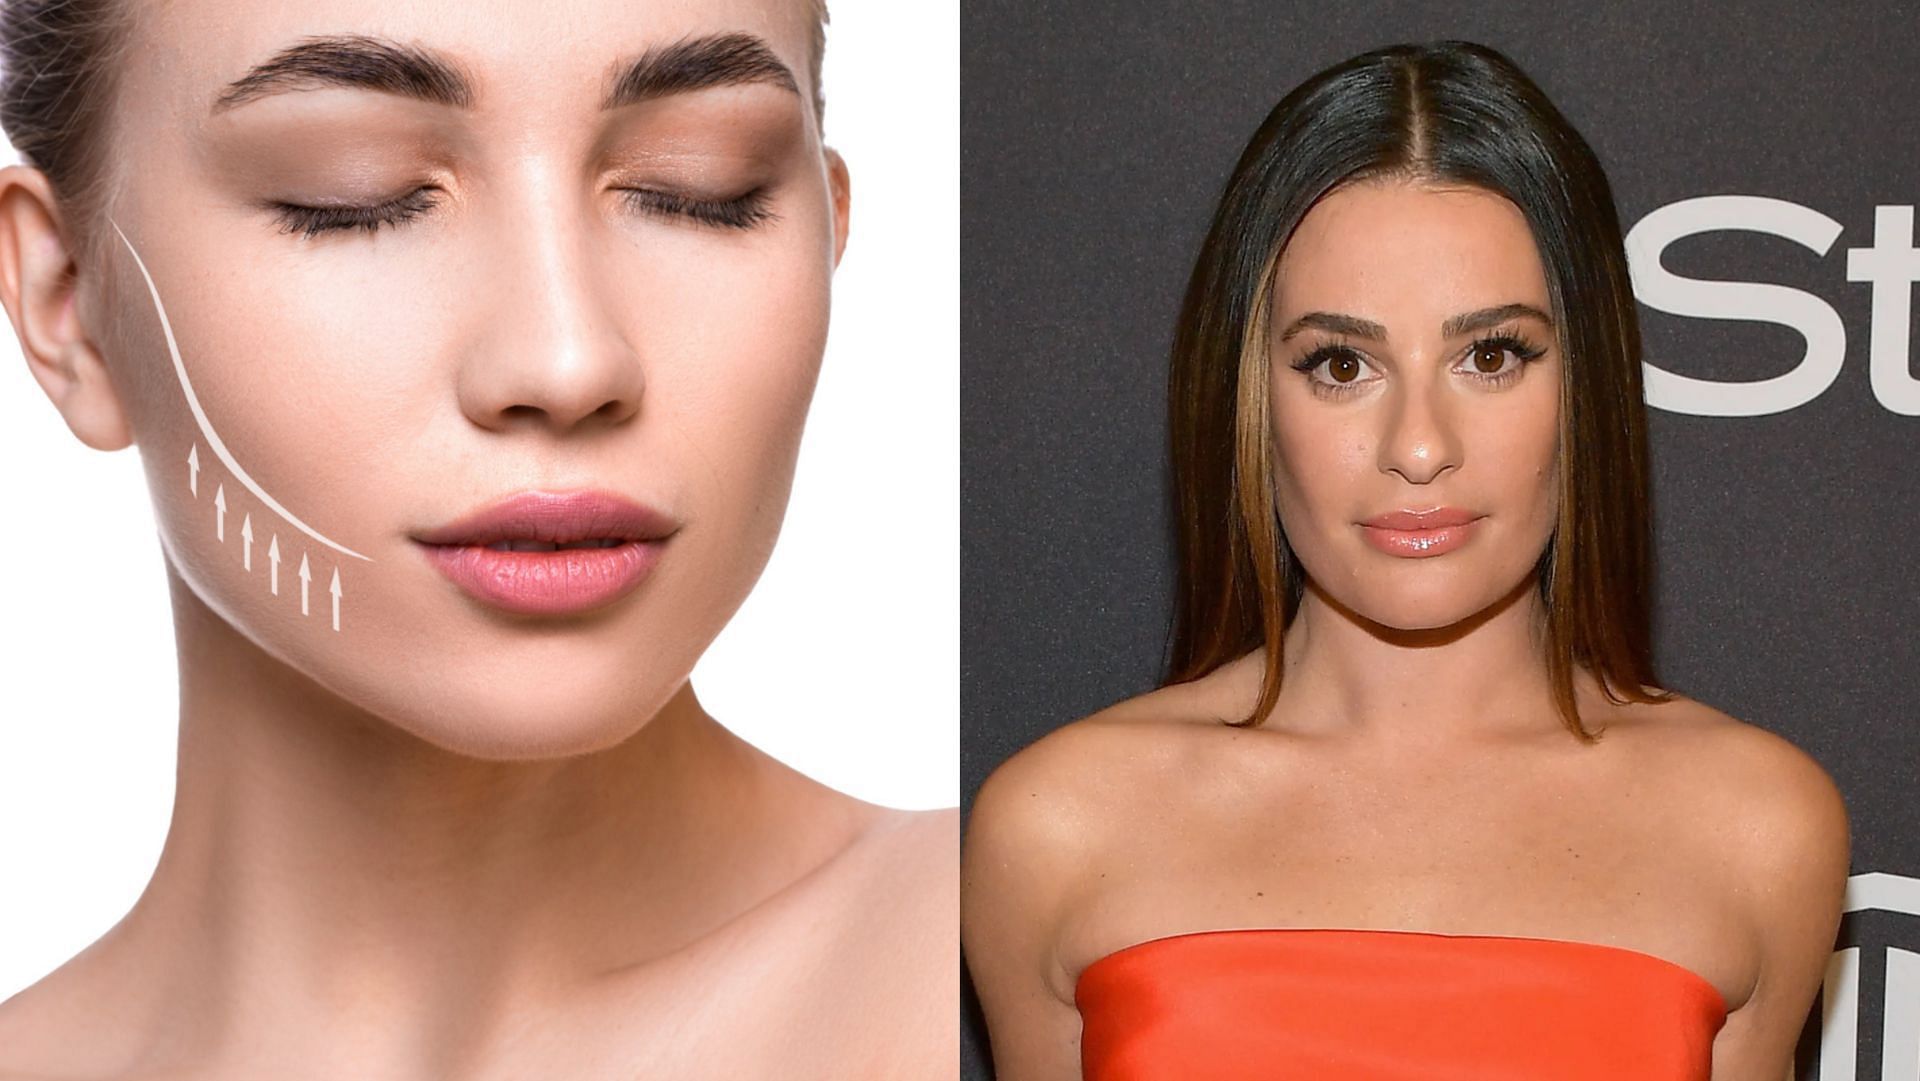 what-is-buccal-fat-removal-cost-and-more-explored-as-lea-michele